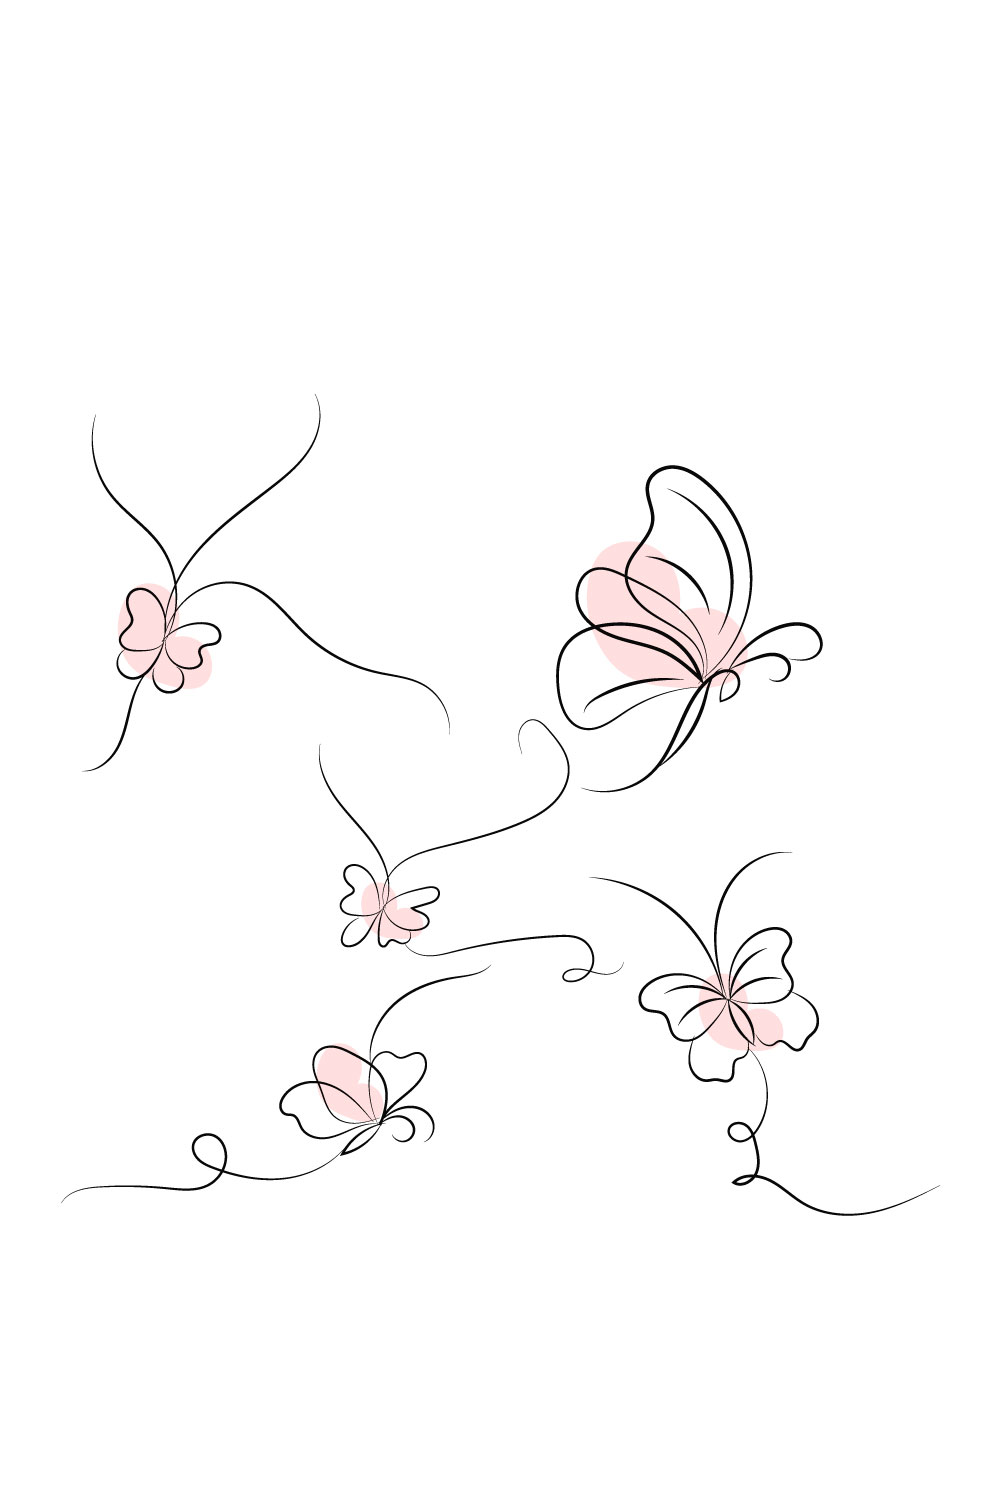 Drawing of two butterflies flying in the air.